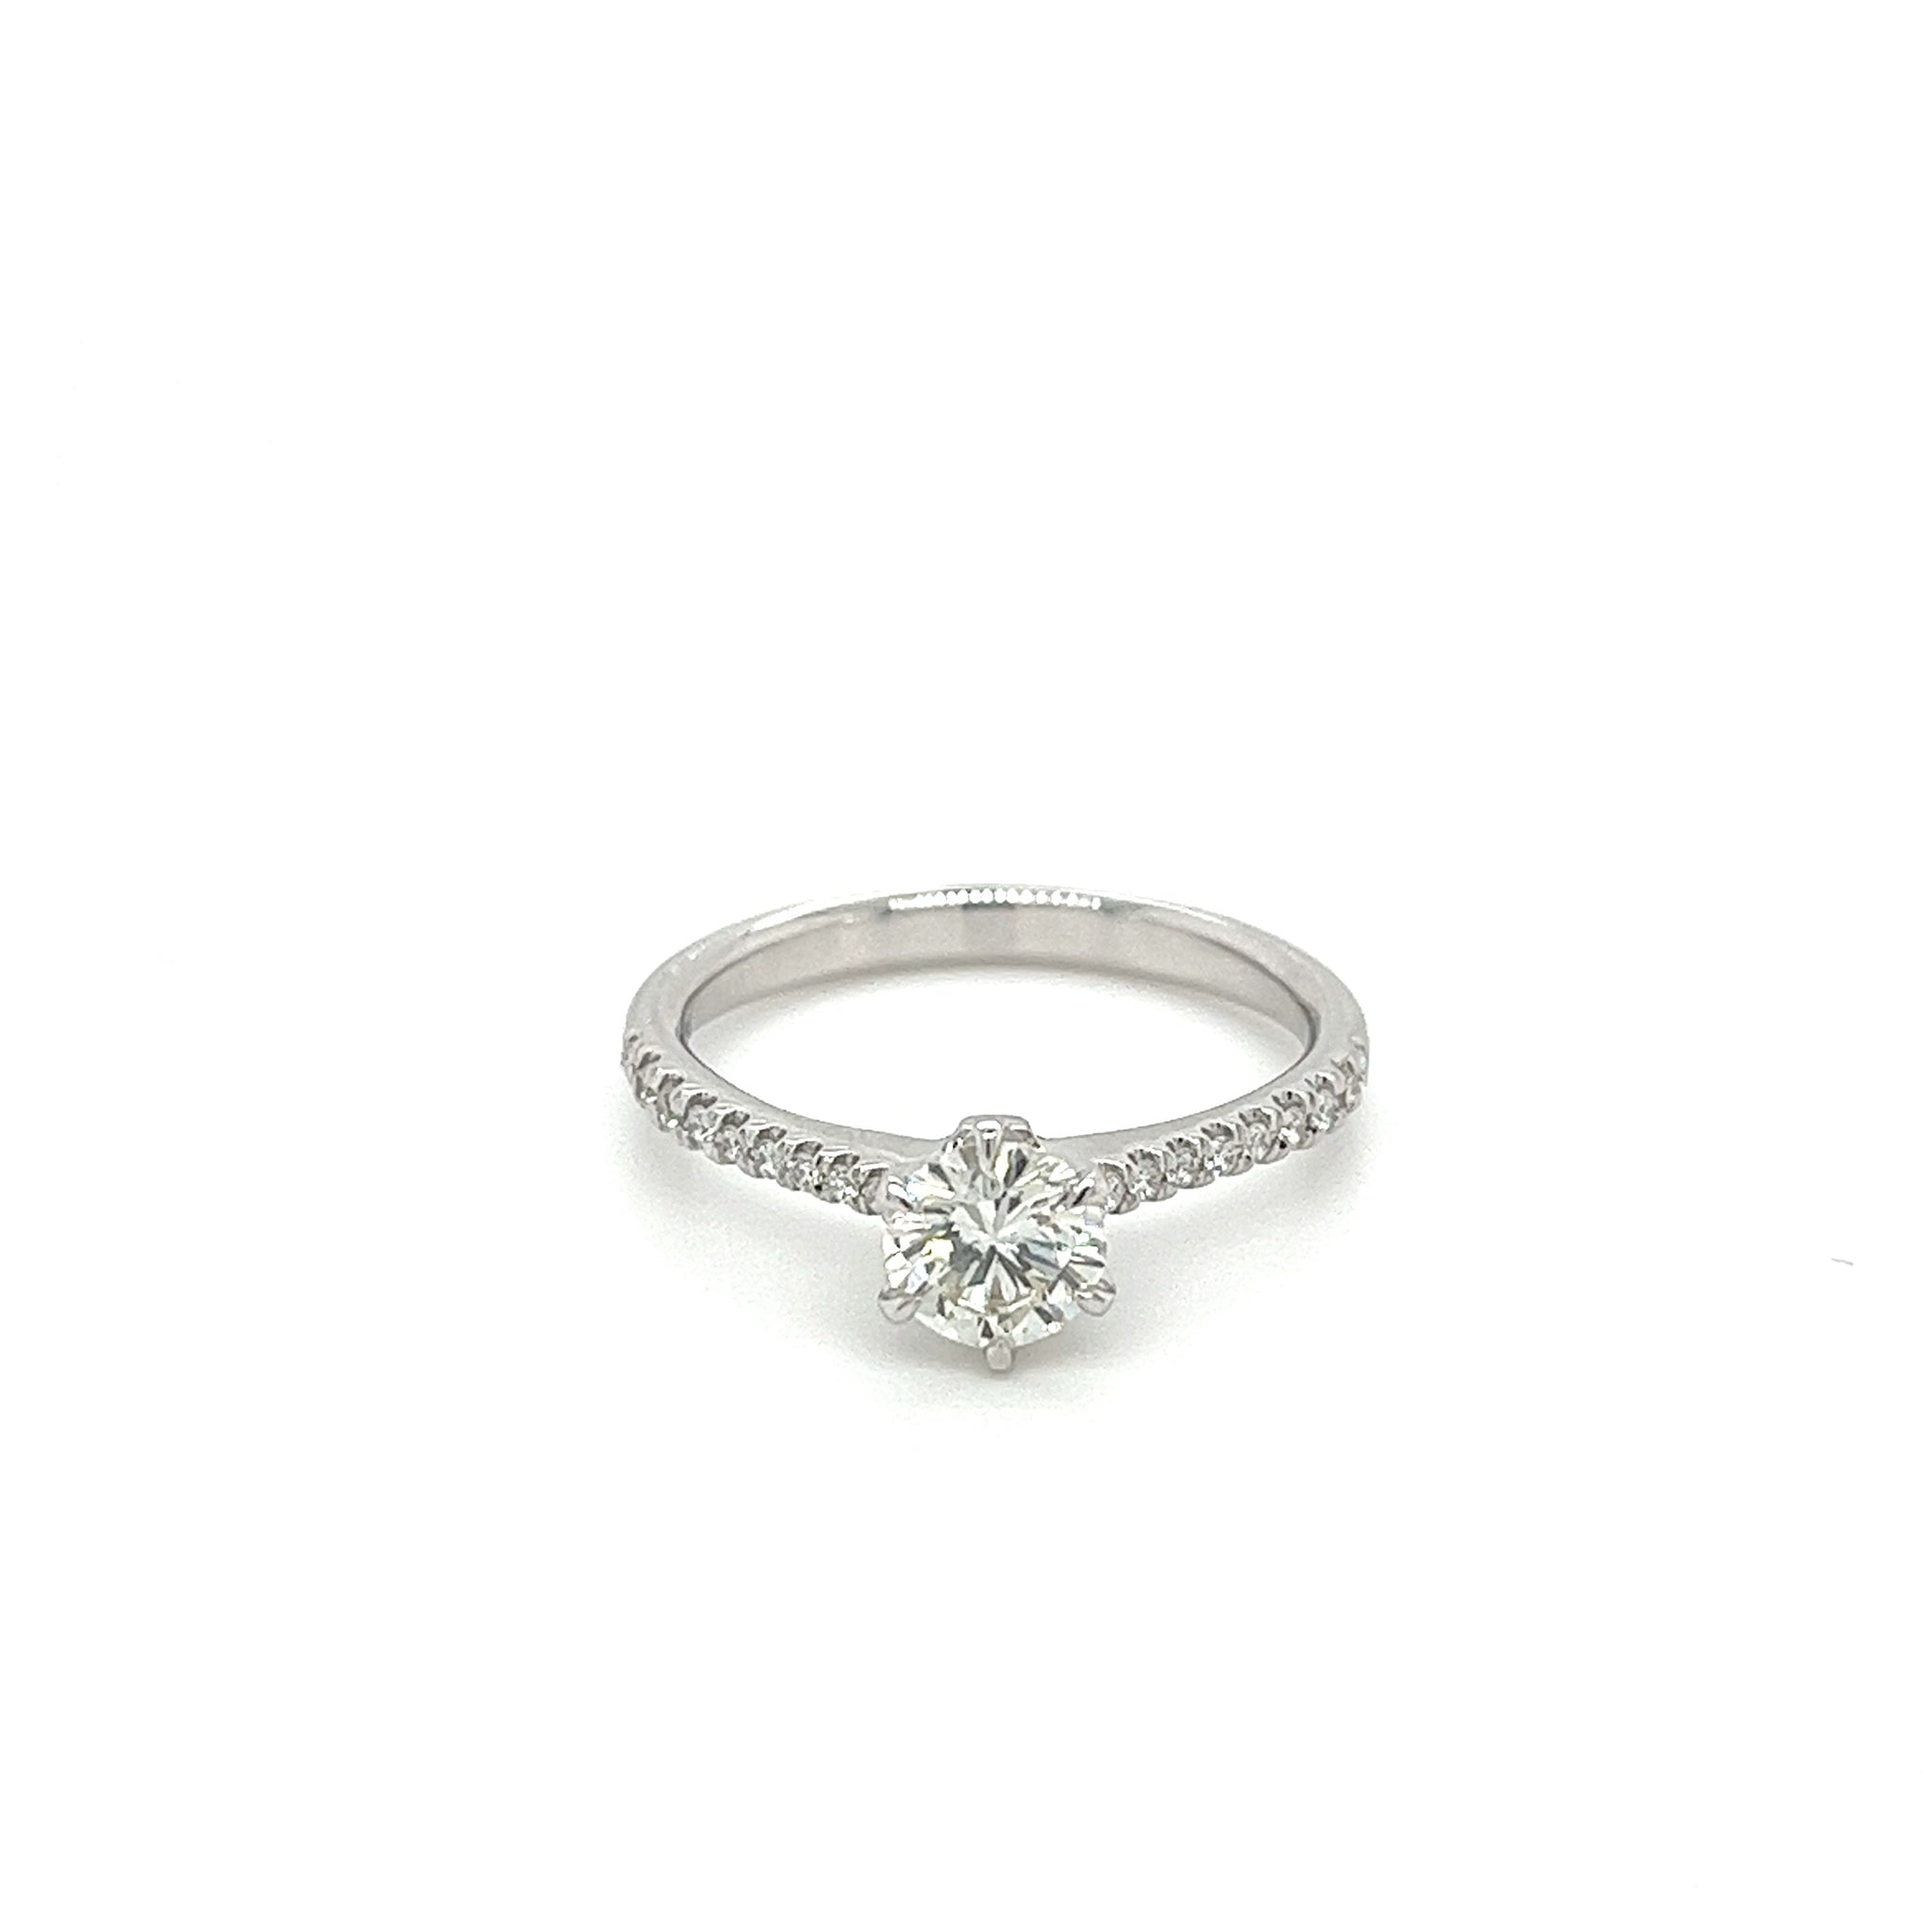 Natural 0.60 Carat Diamond Engagement Ring with 6-prong Straight Shank Diamond Sides in 18K White Gold